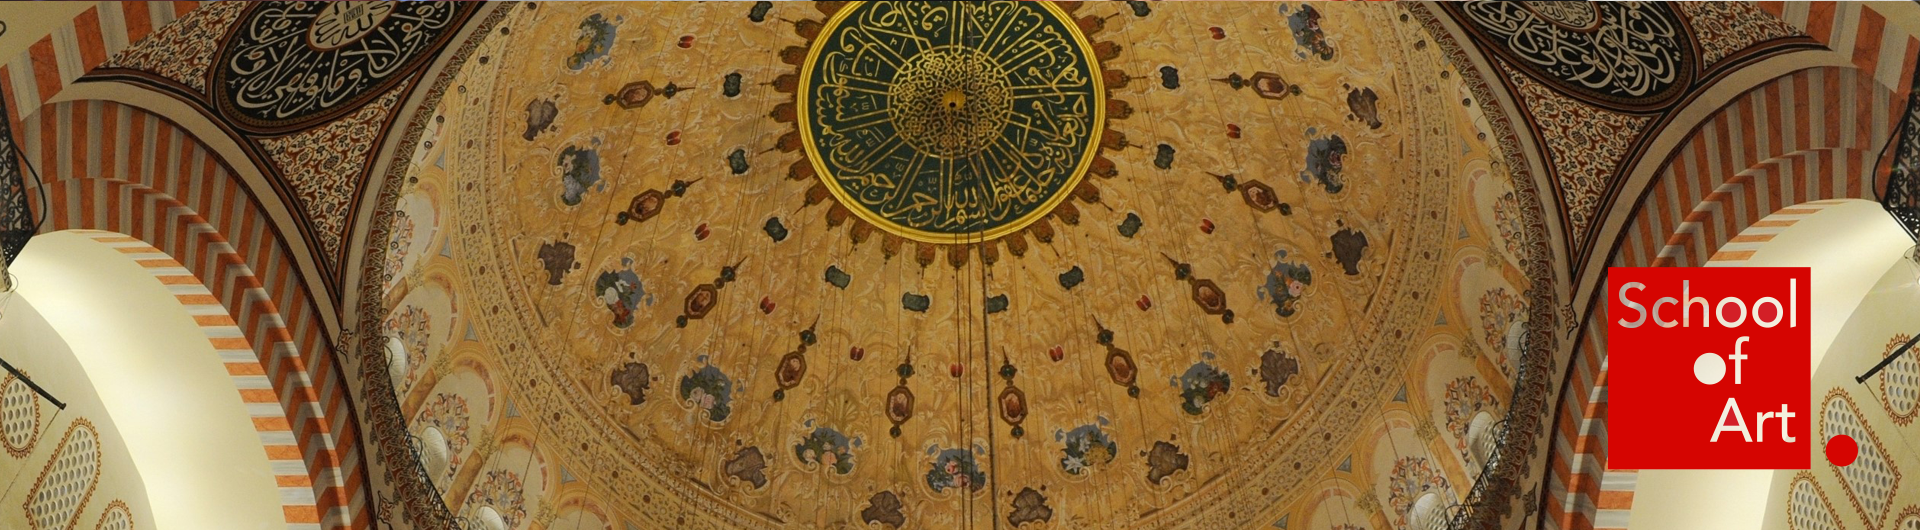 Painted ceiling in the Suleymaniye Mosque, Istanbul